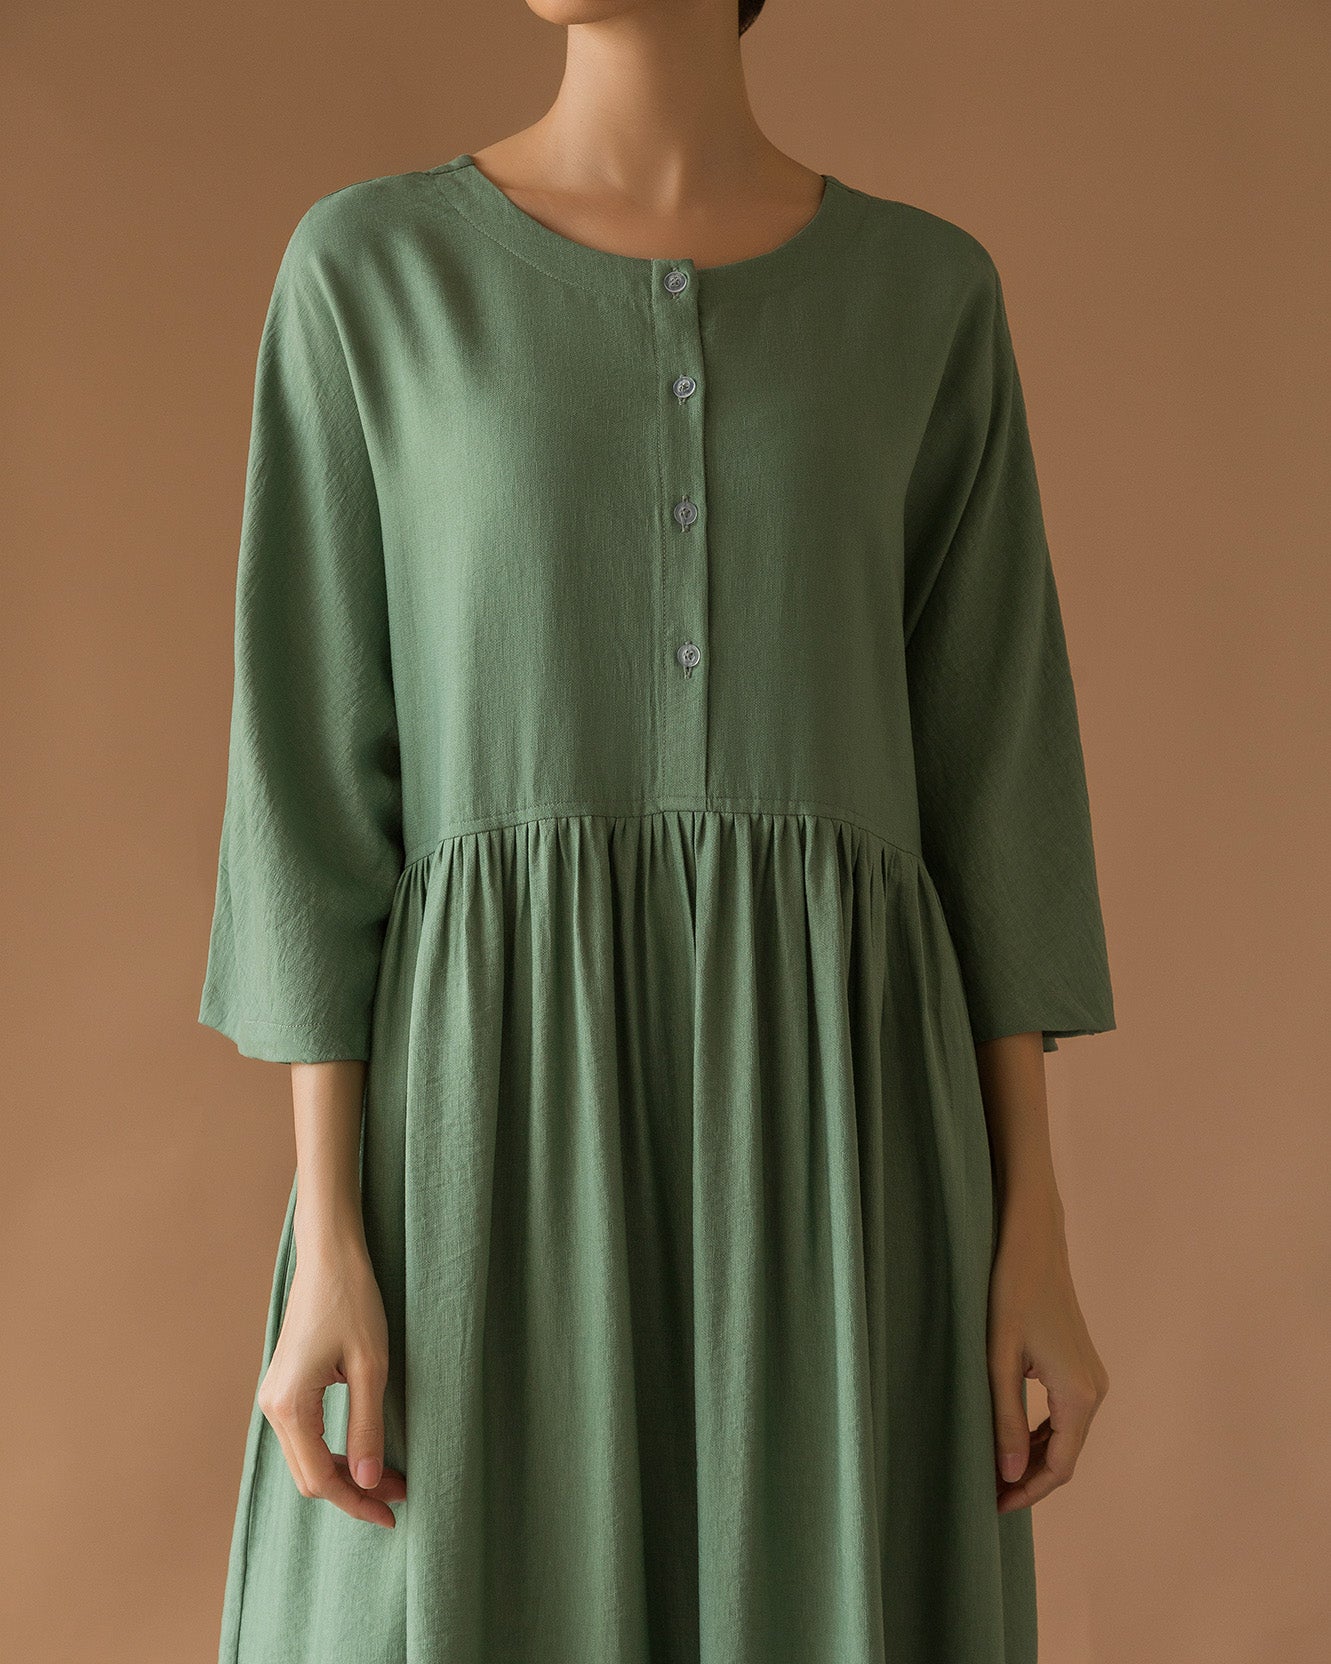 STYLE 19 - olive green